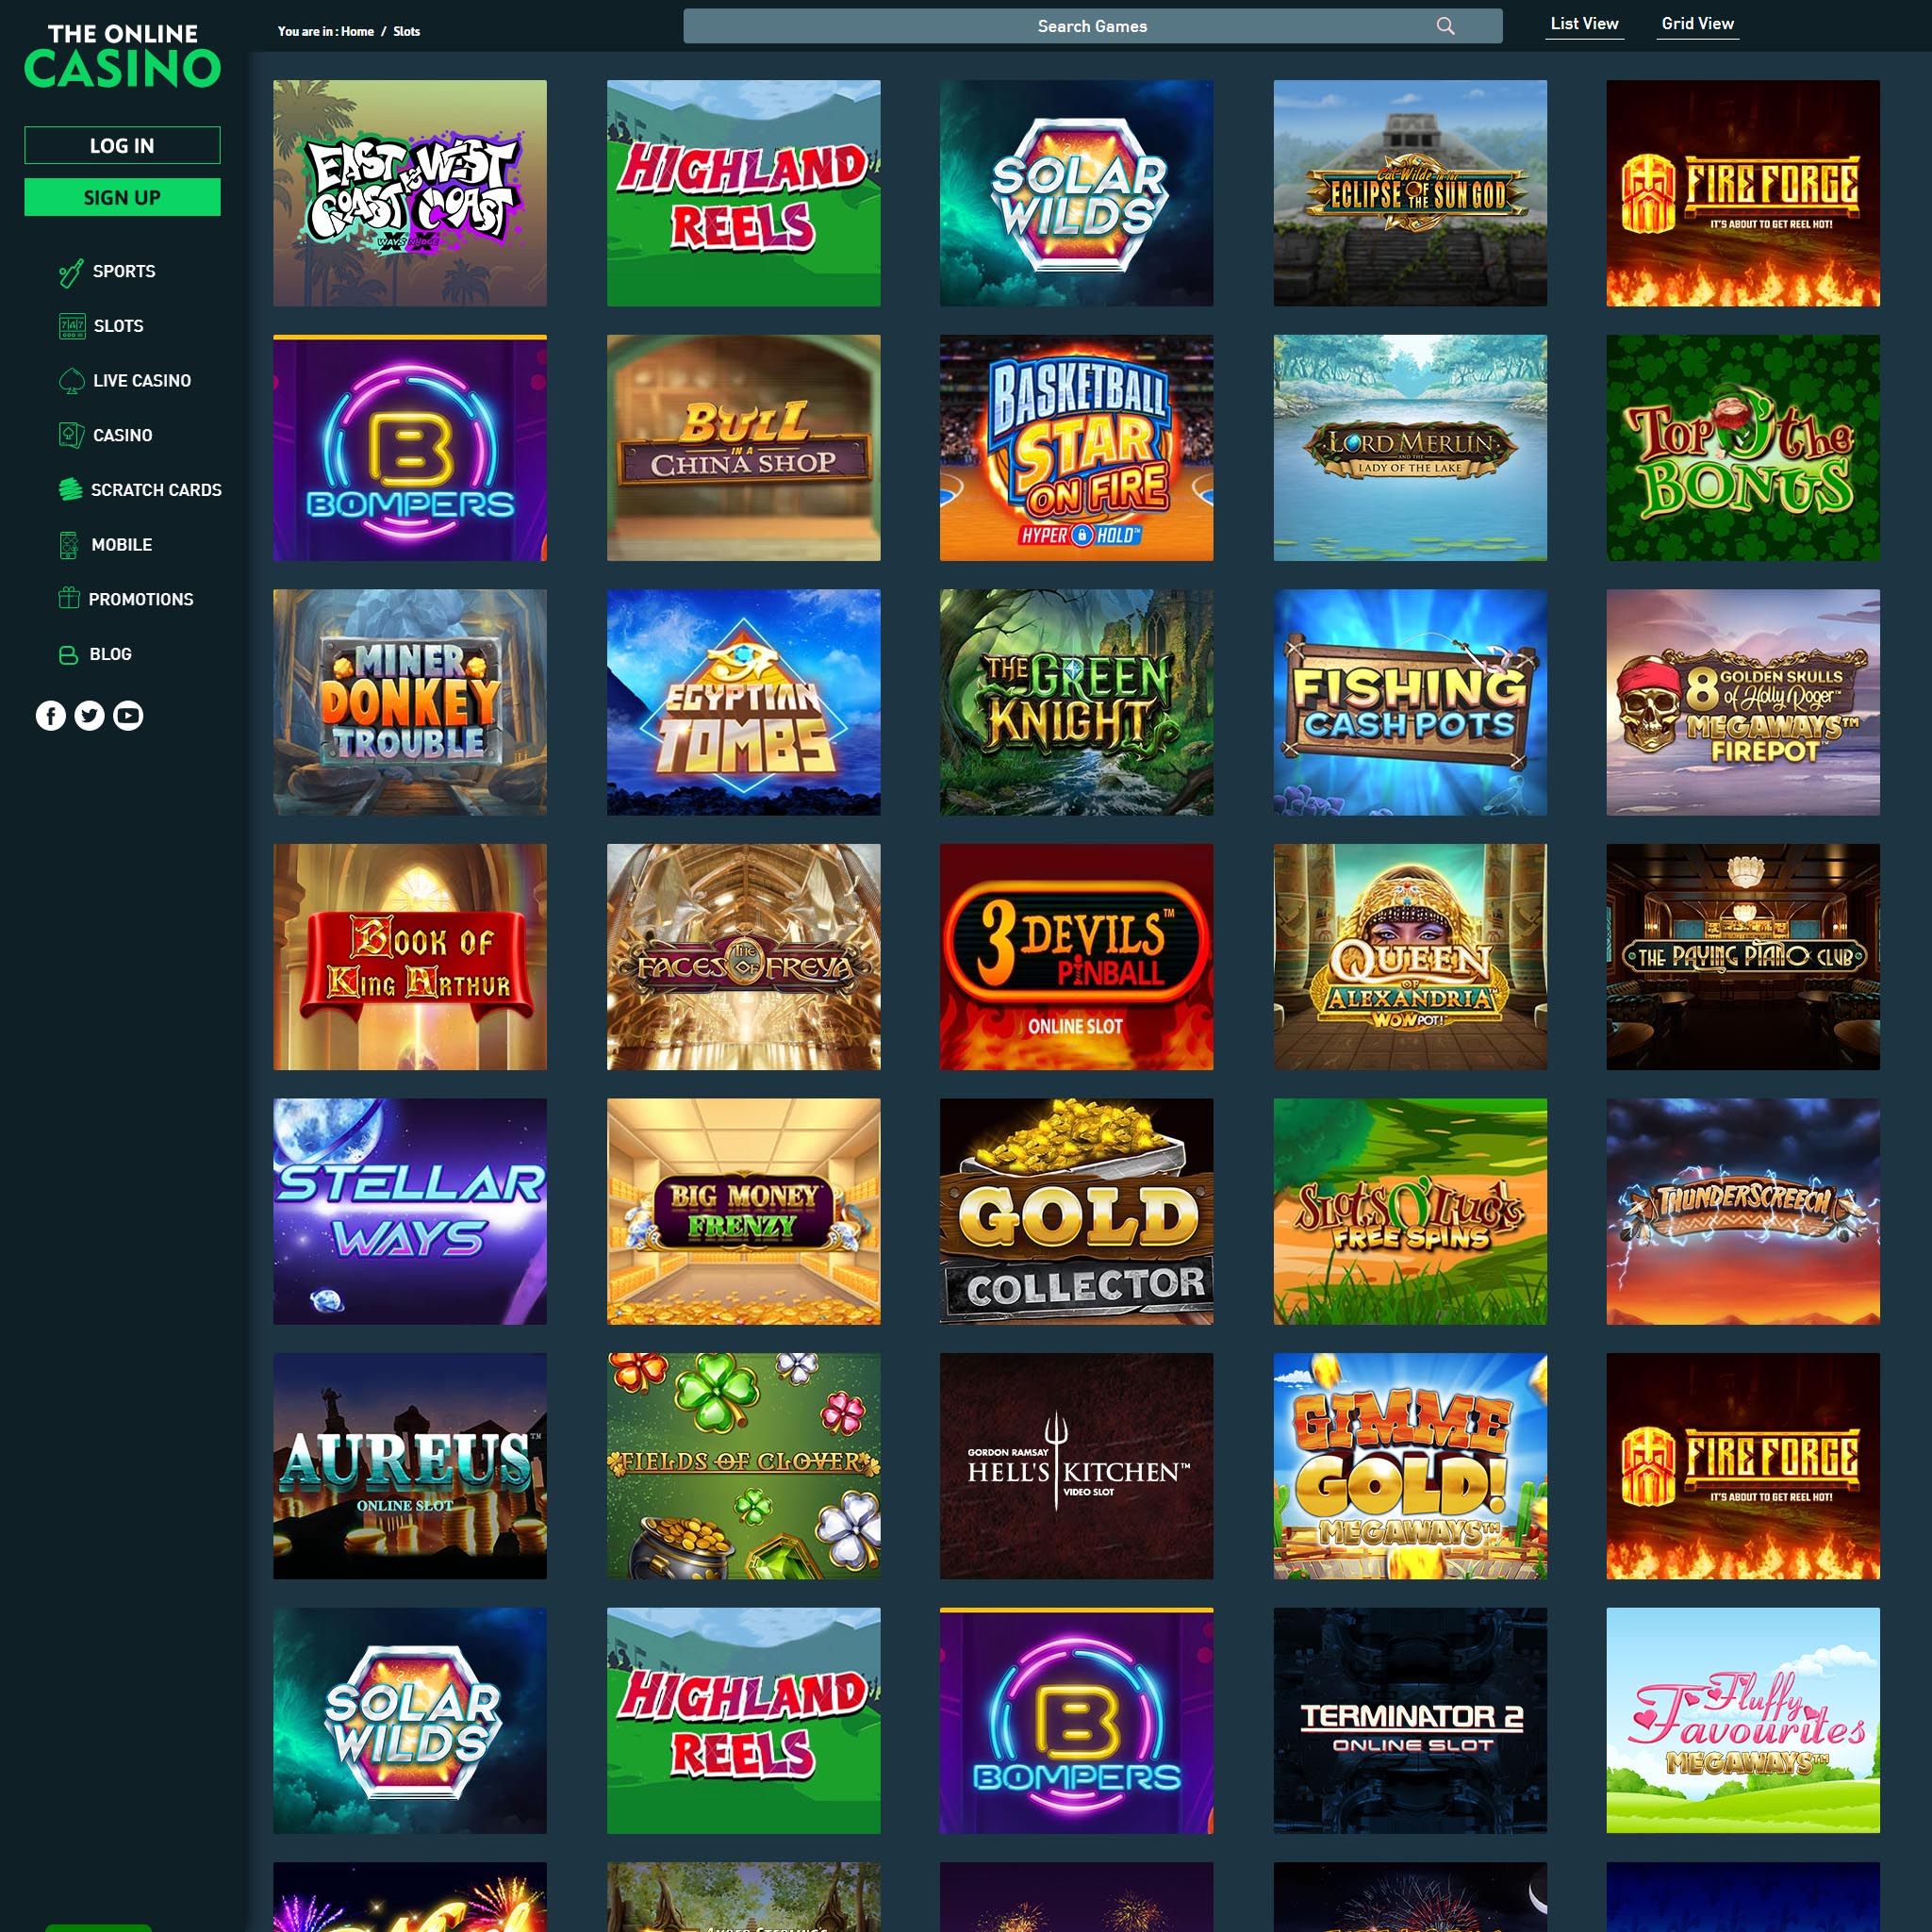 The Online Casino full games catalogue